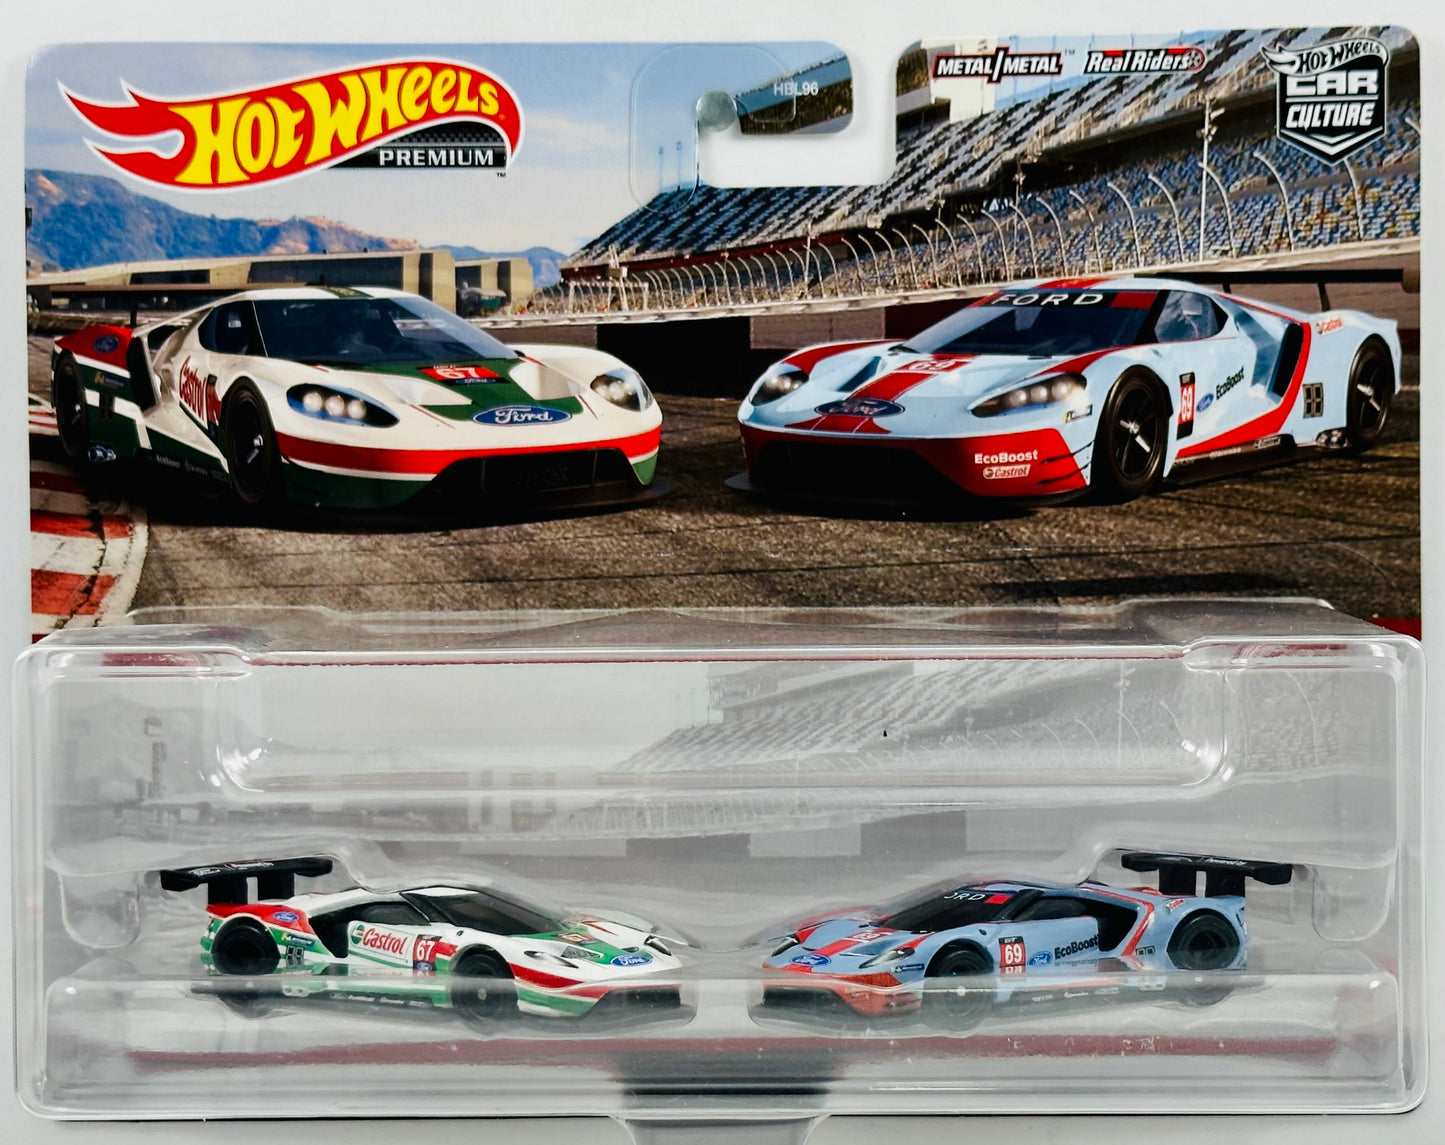 Hot Wheels 2022 - Premium / Car Culture - Ford GT Theme 2 Pack - '16 Ford GT Race X2 - White & Light Blue - Metal/Metal & Real Riders - Ford Offical Licensed Product - Target Exclusive